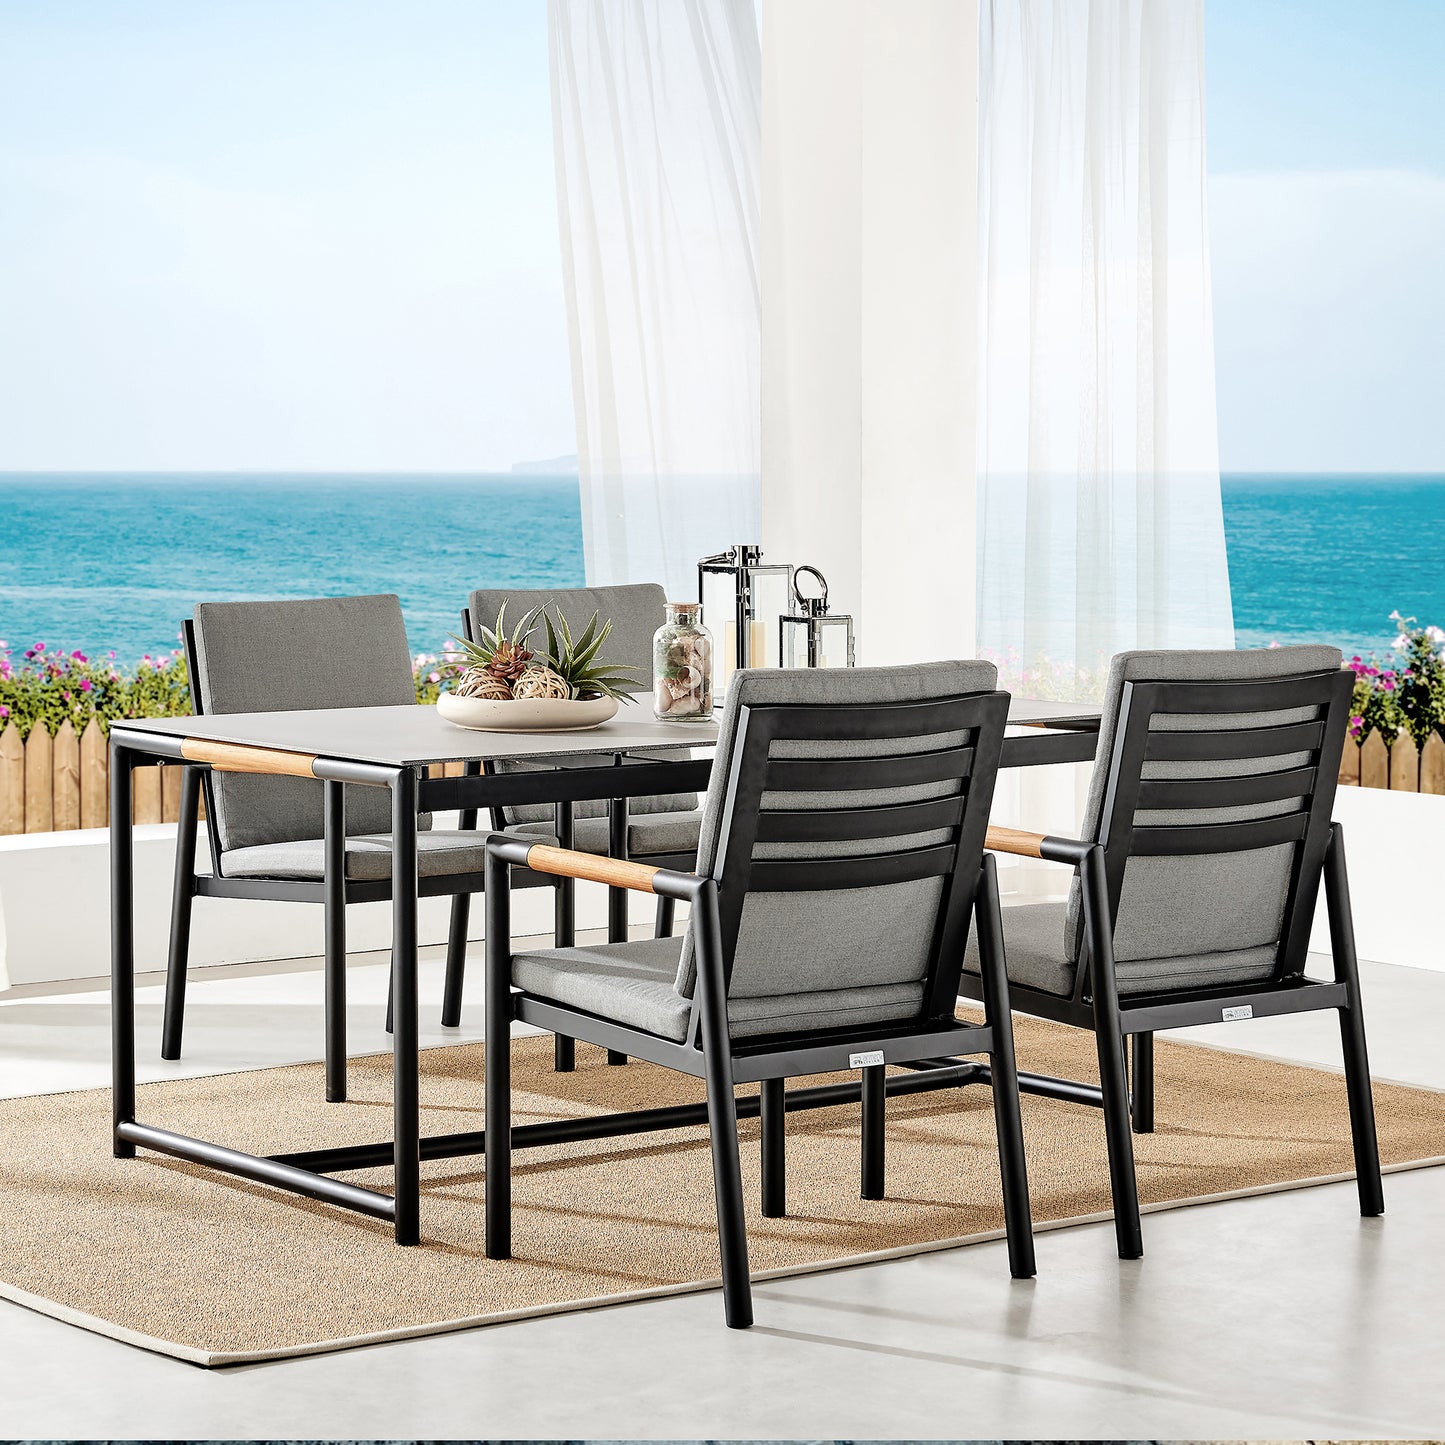 Crown Black Aluminum and Teak Outdoor Dining Table with Stone Top